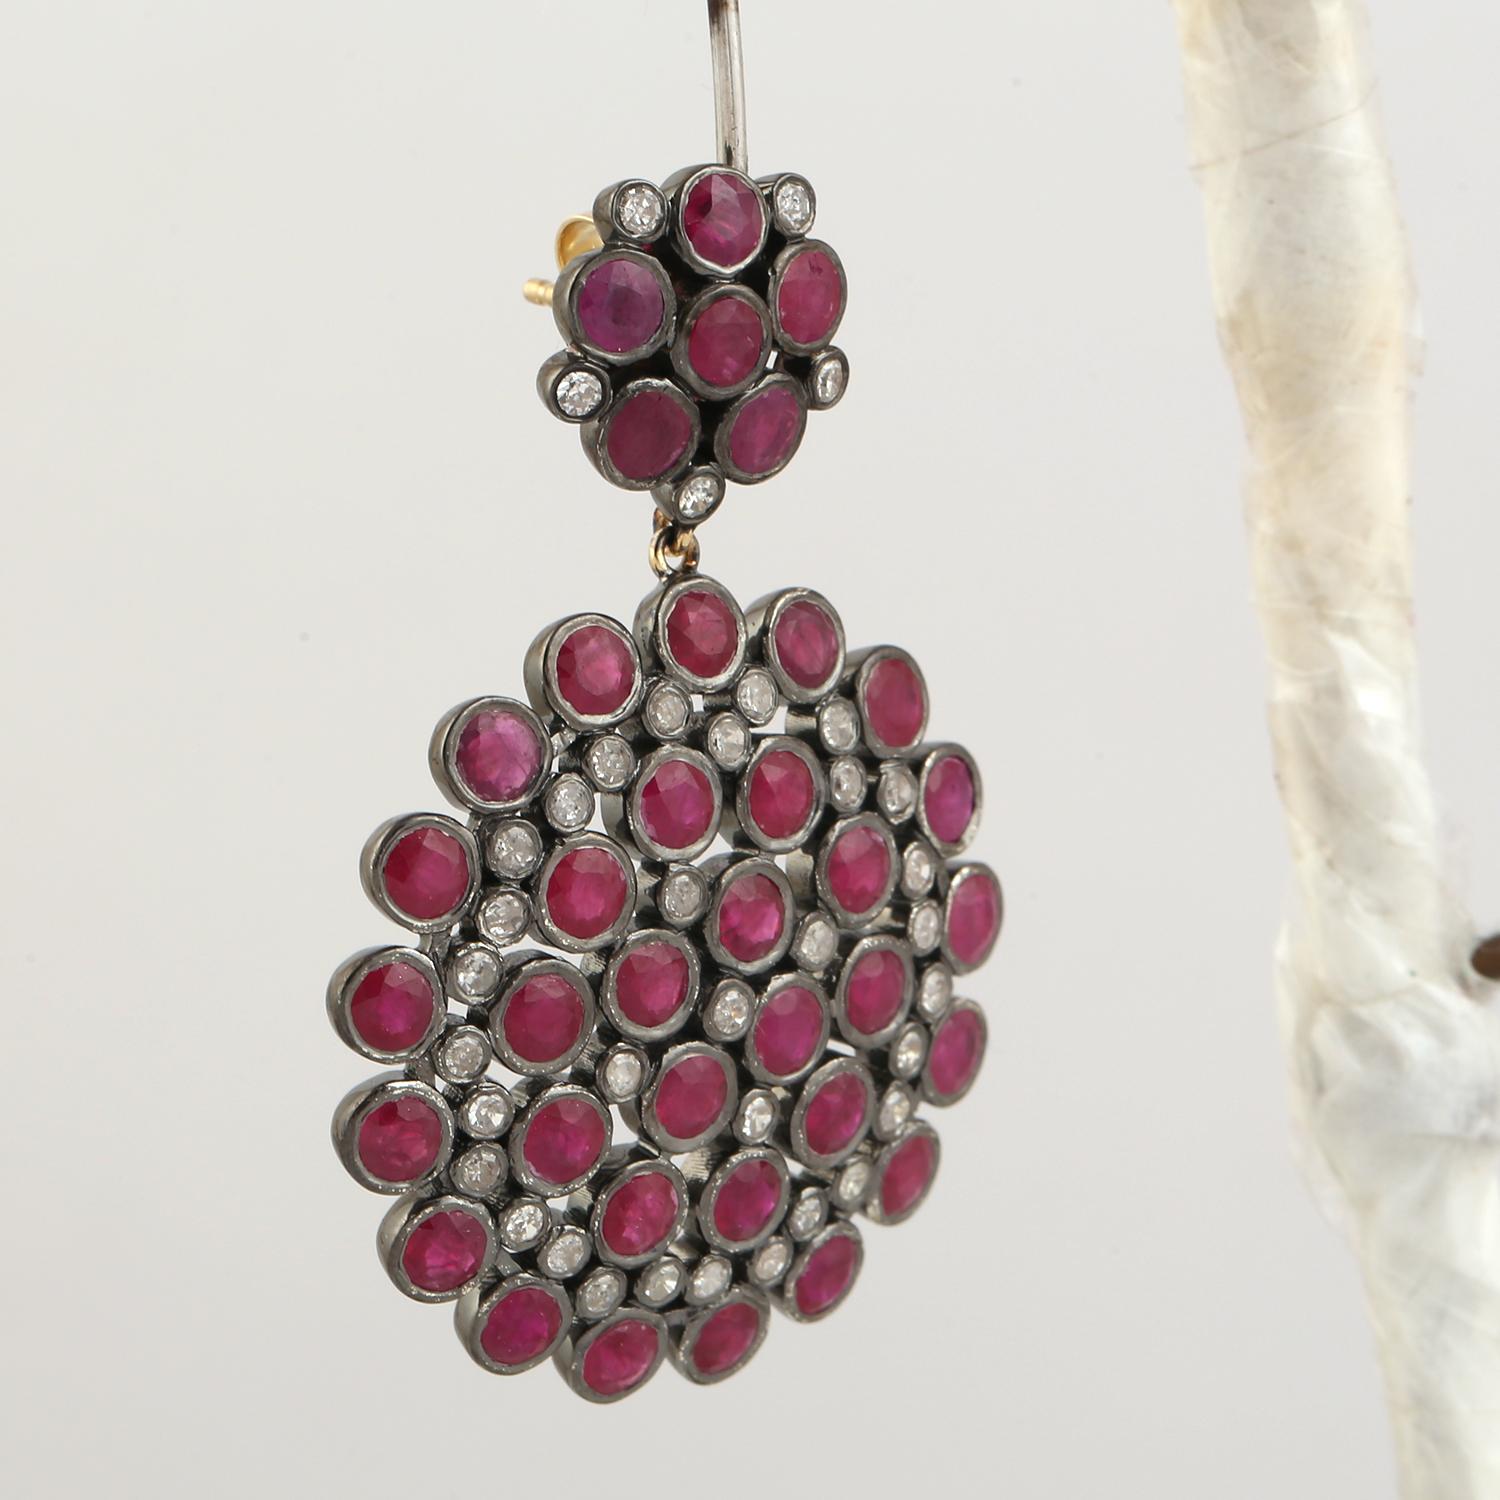 Contemporary 15.35 ct Ruby Dangle Earrings With Diamonds Made In 14K Gold & Silver For Sale